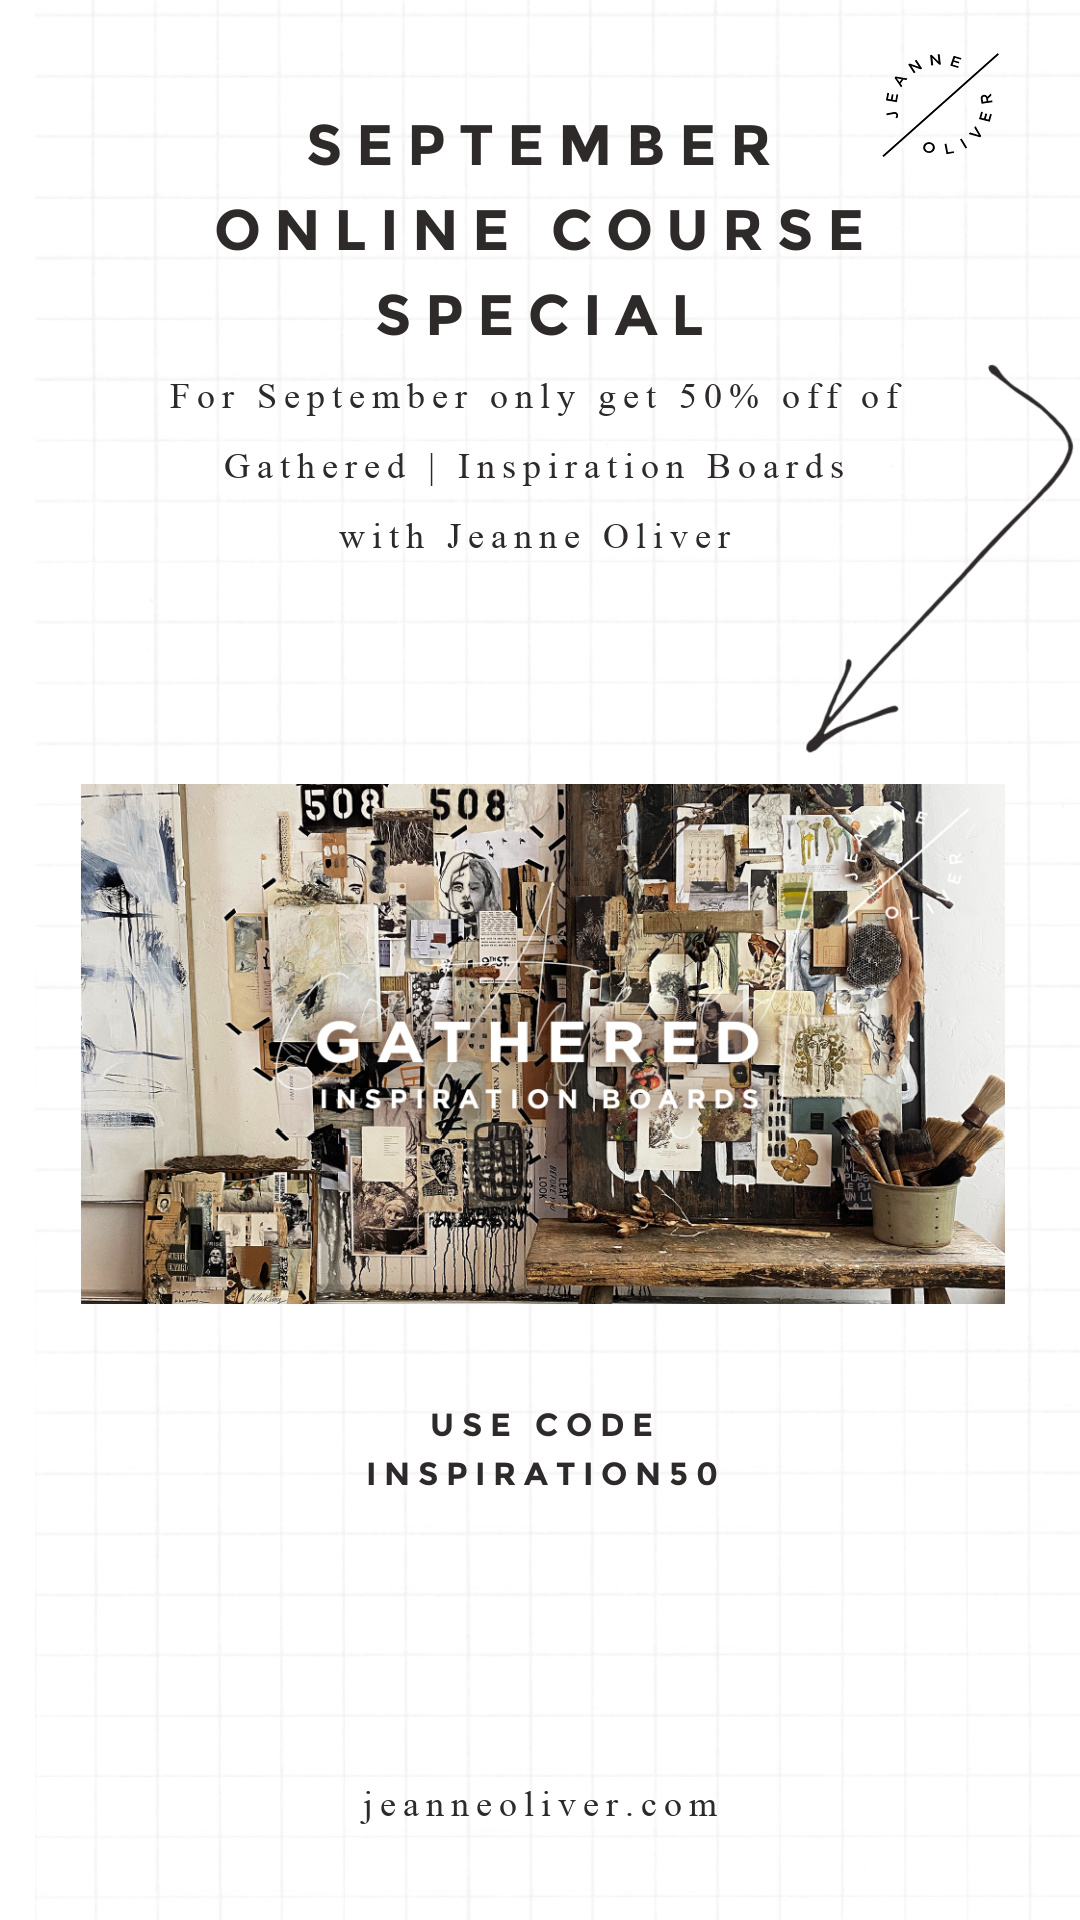 September Online Course Special | Gathered Inspiration Boards 50% Off